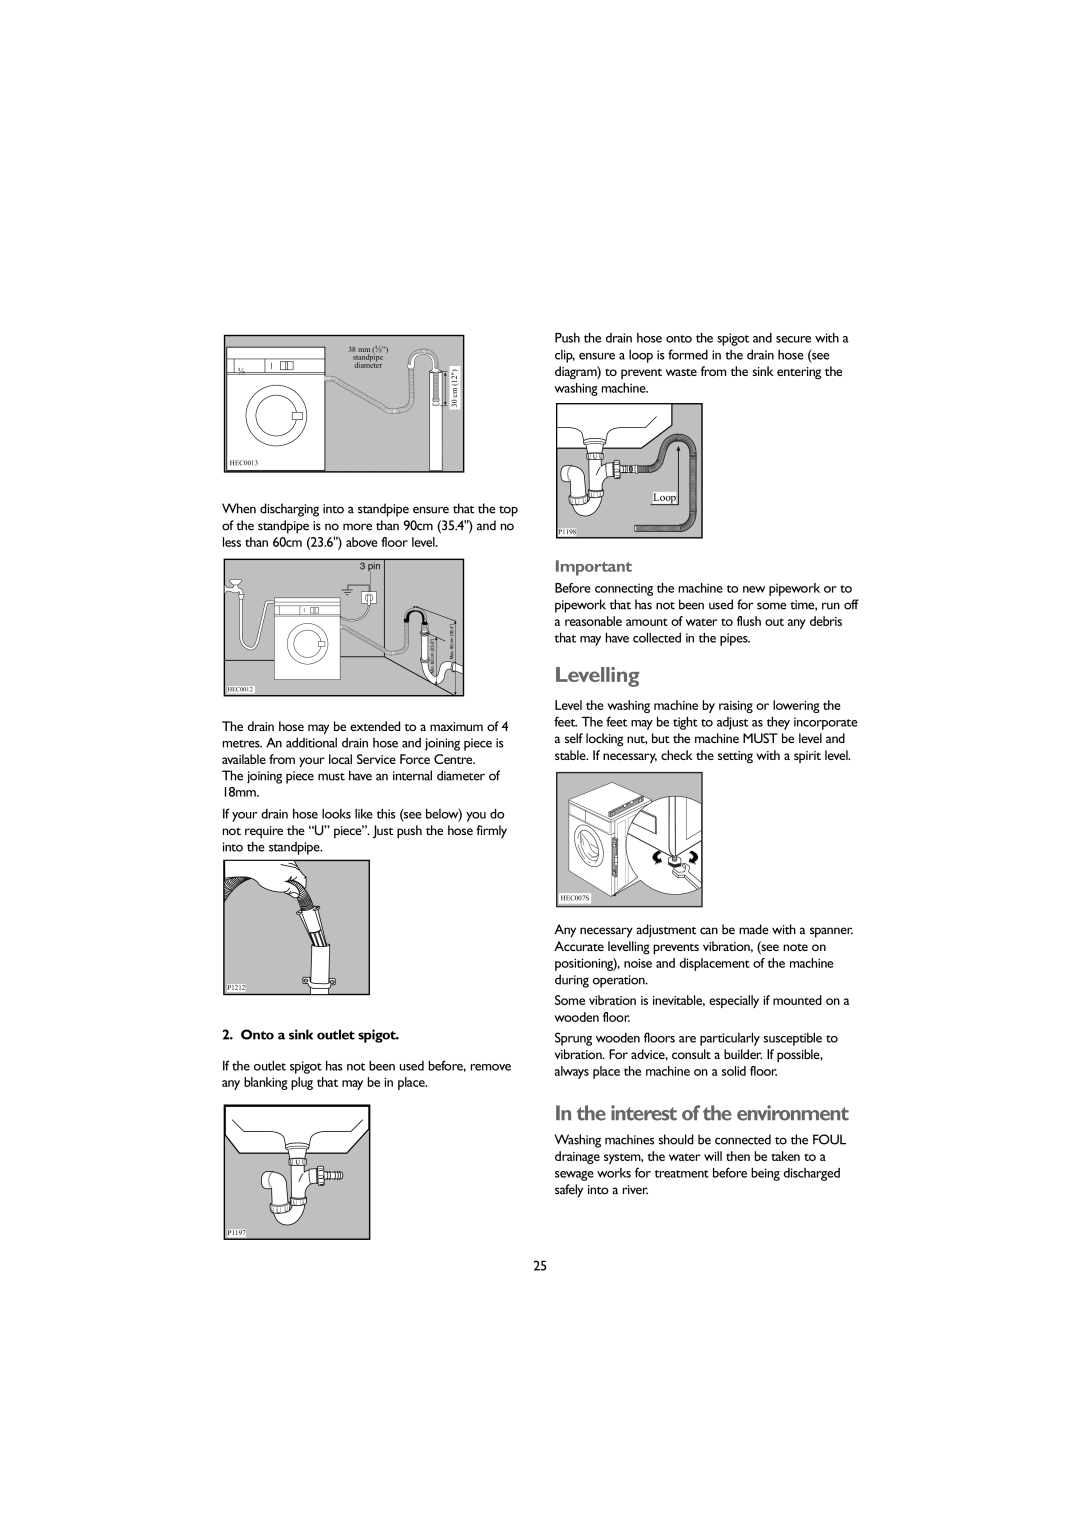 John Lewis JLWM 1406 instruction manual Levelling, In the interest of the environment, Onto a sink outlet spigot 